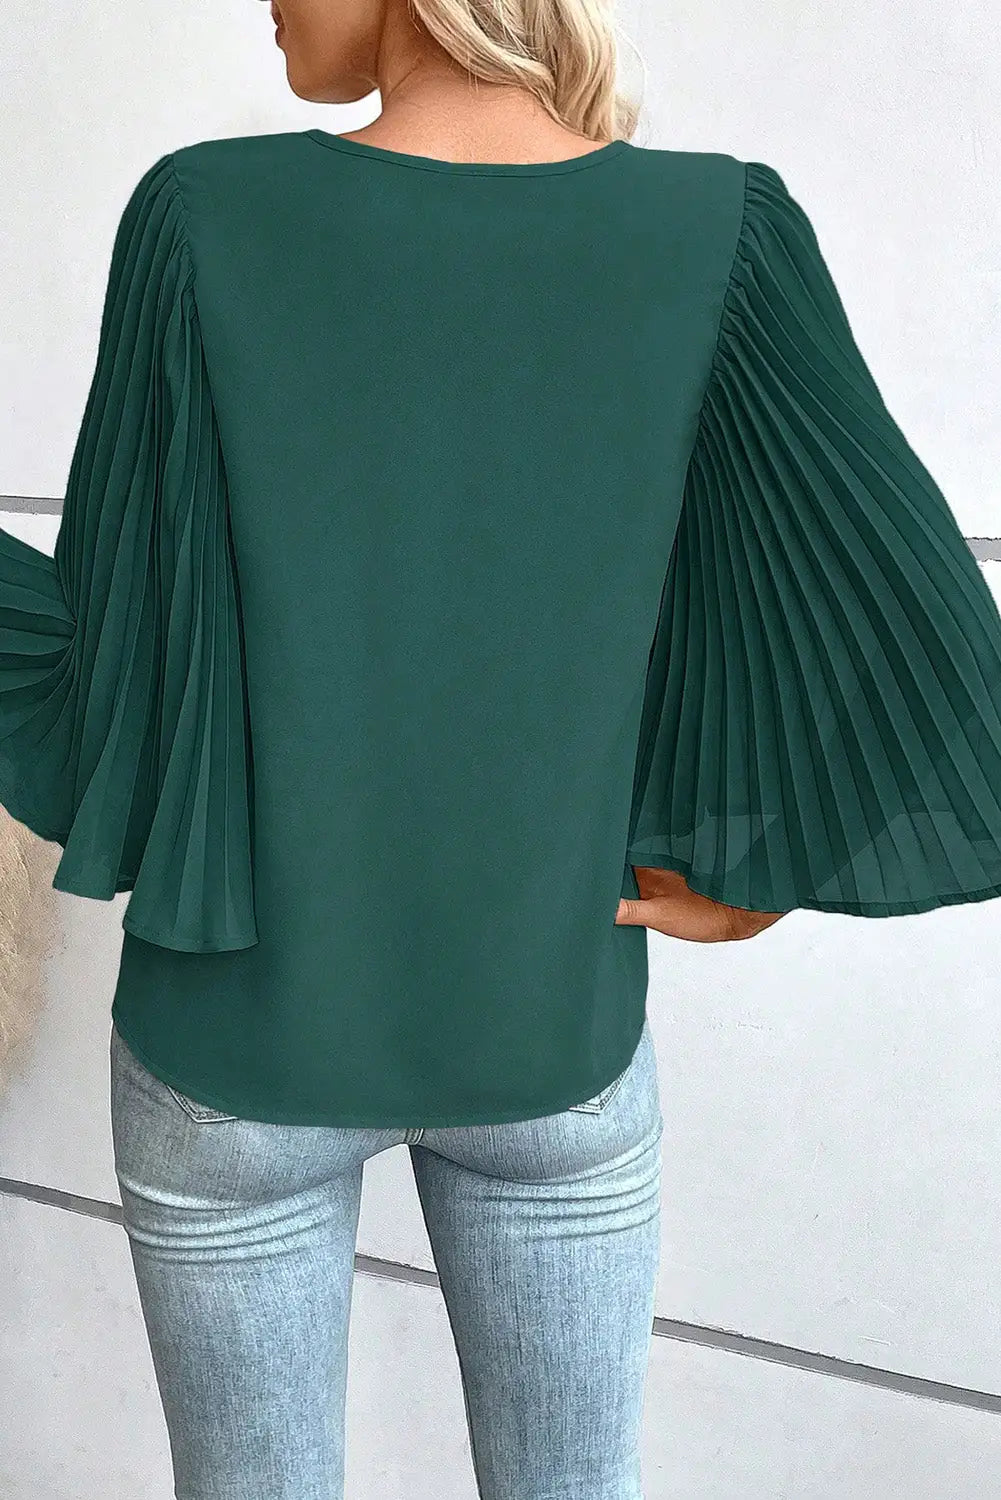 Blackish green 3/4 pleated bell sleeve v neck blouse - blouses & shirts